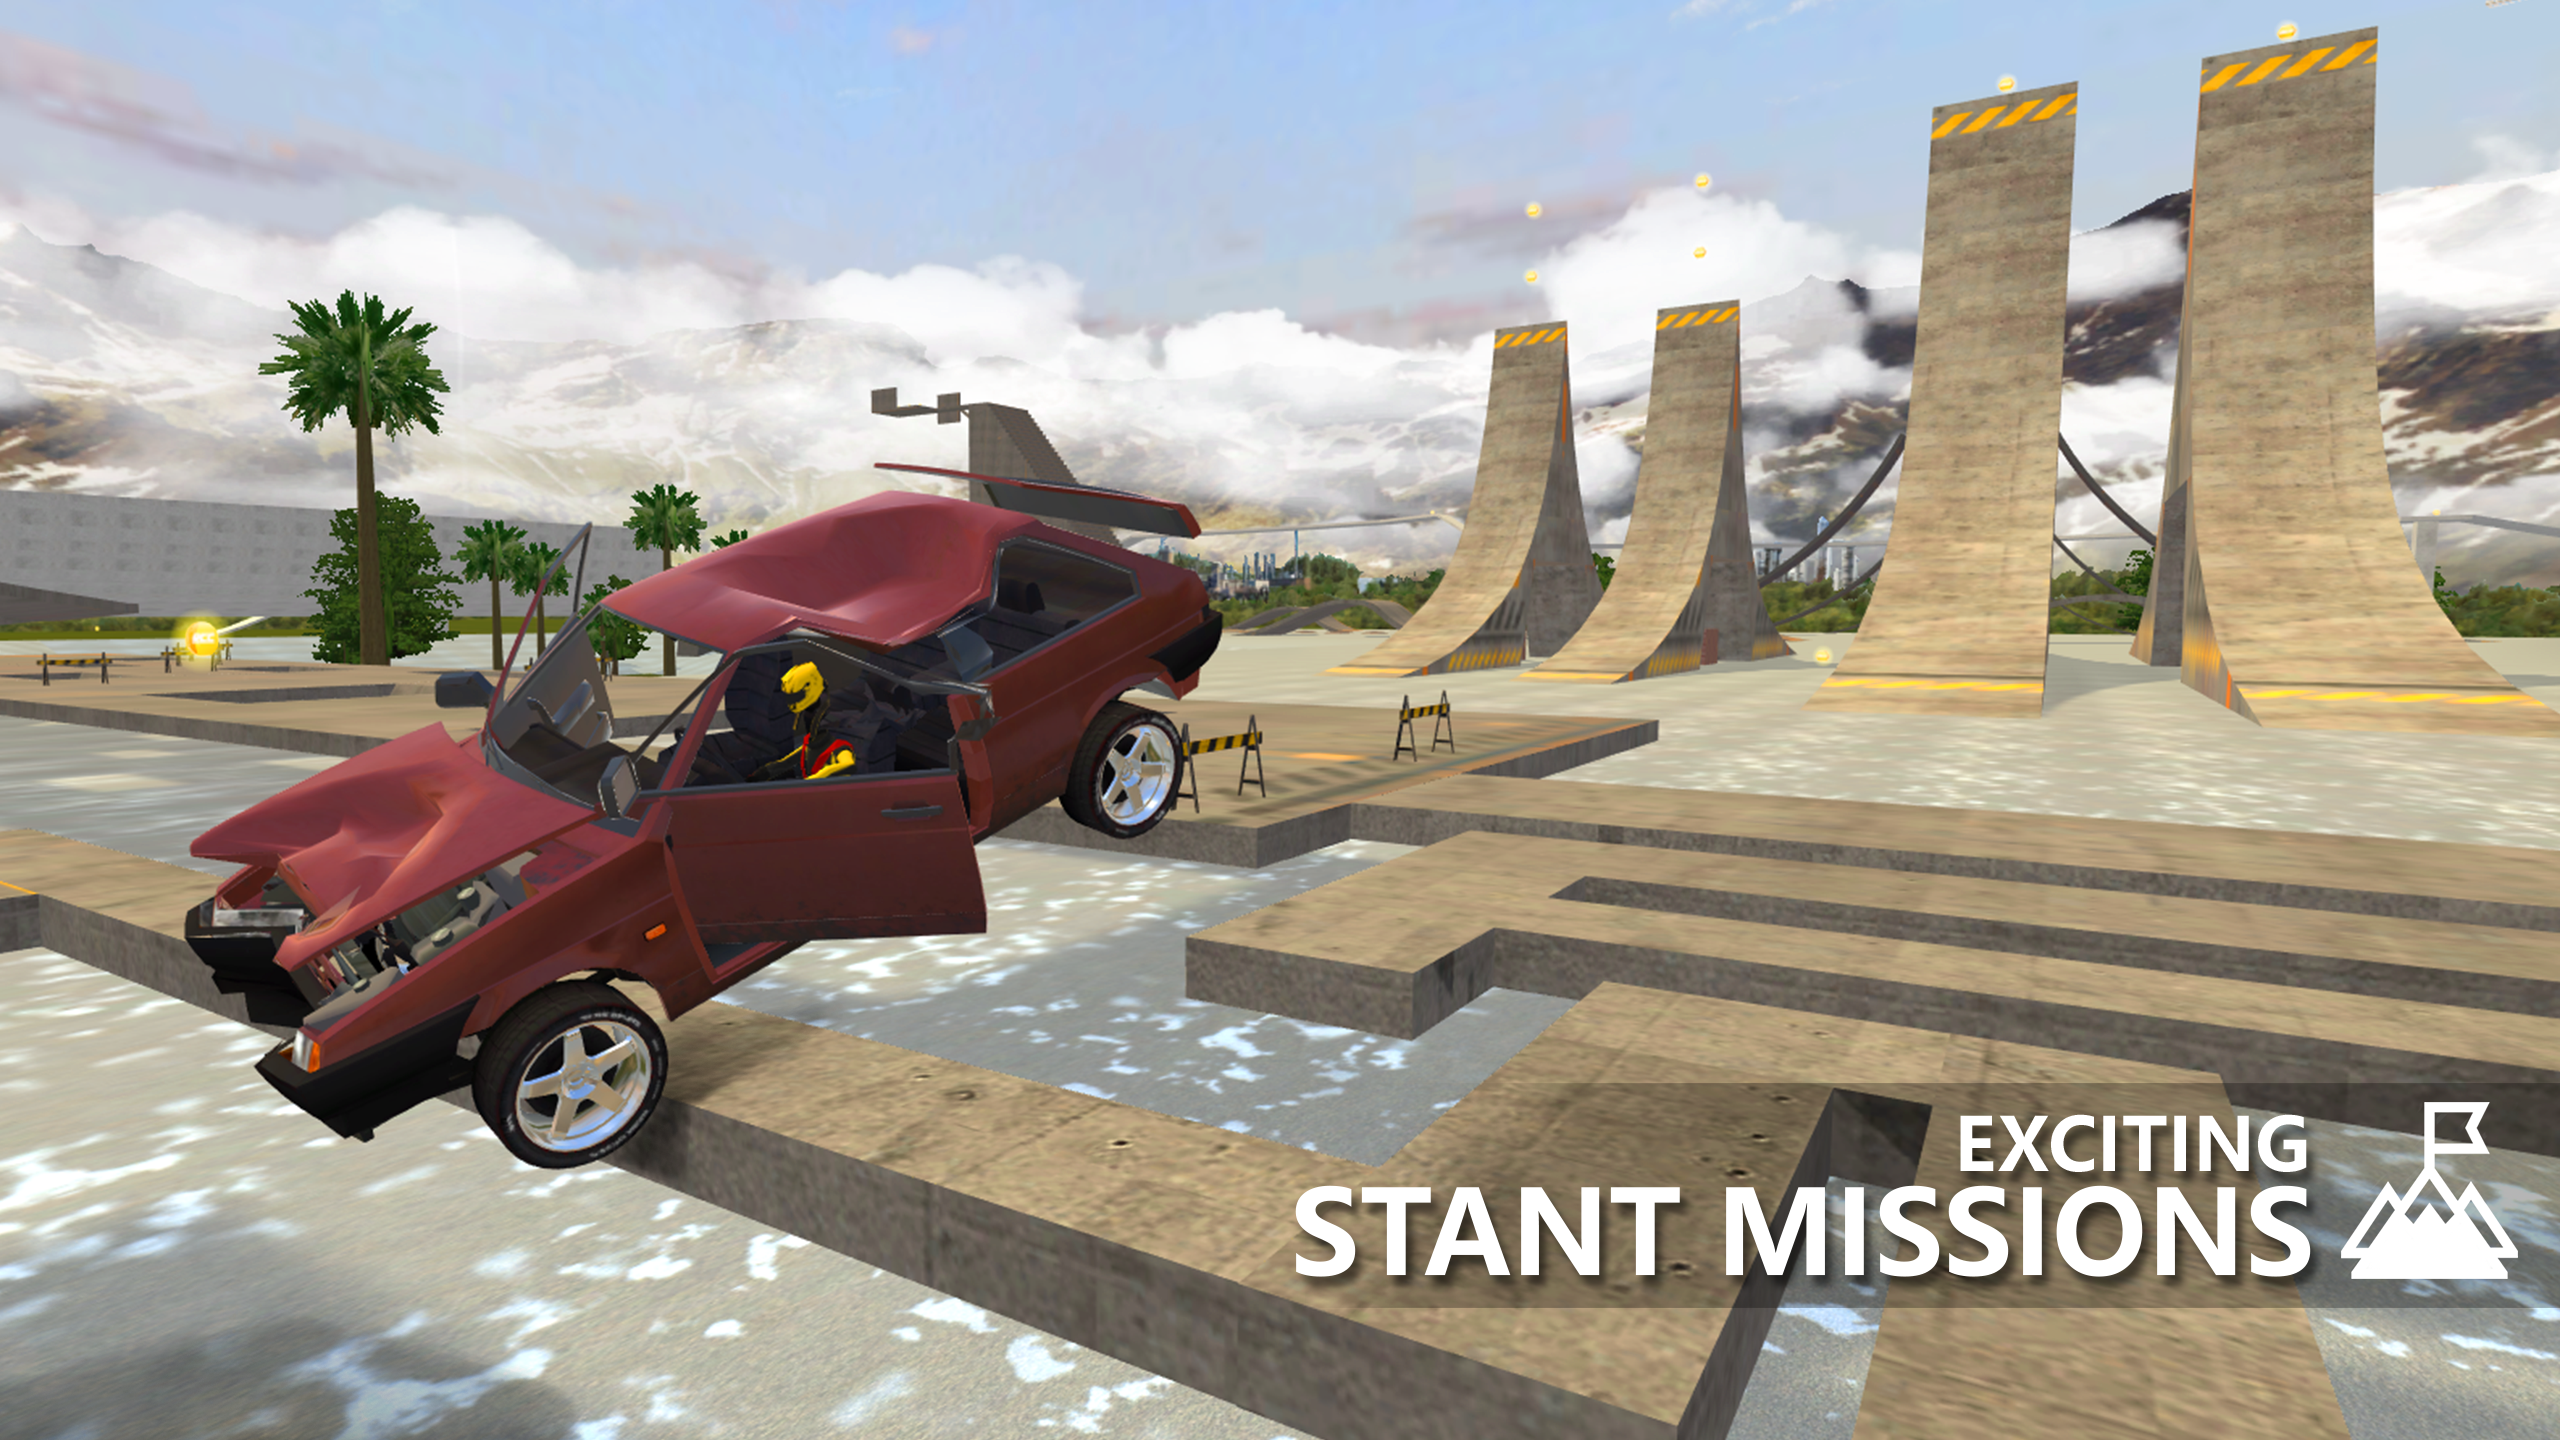 Play RCC - Real Car Crash Simulator Online for Free on PC & Mobile